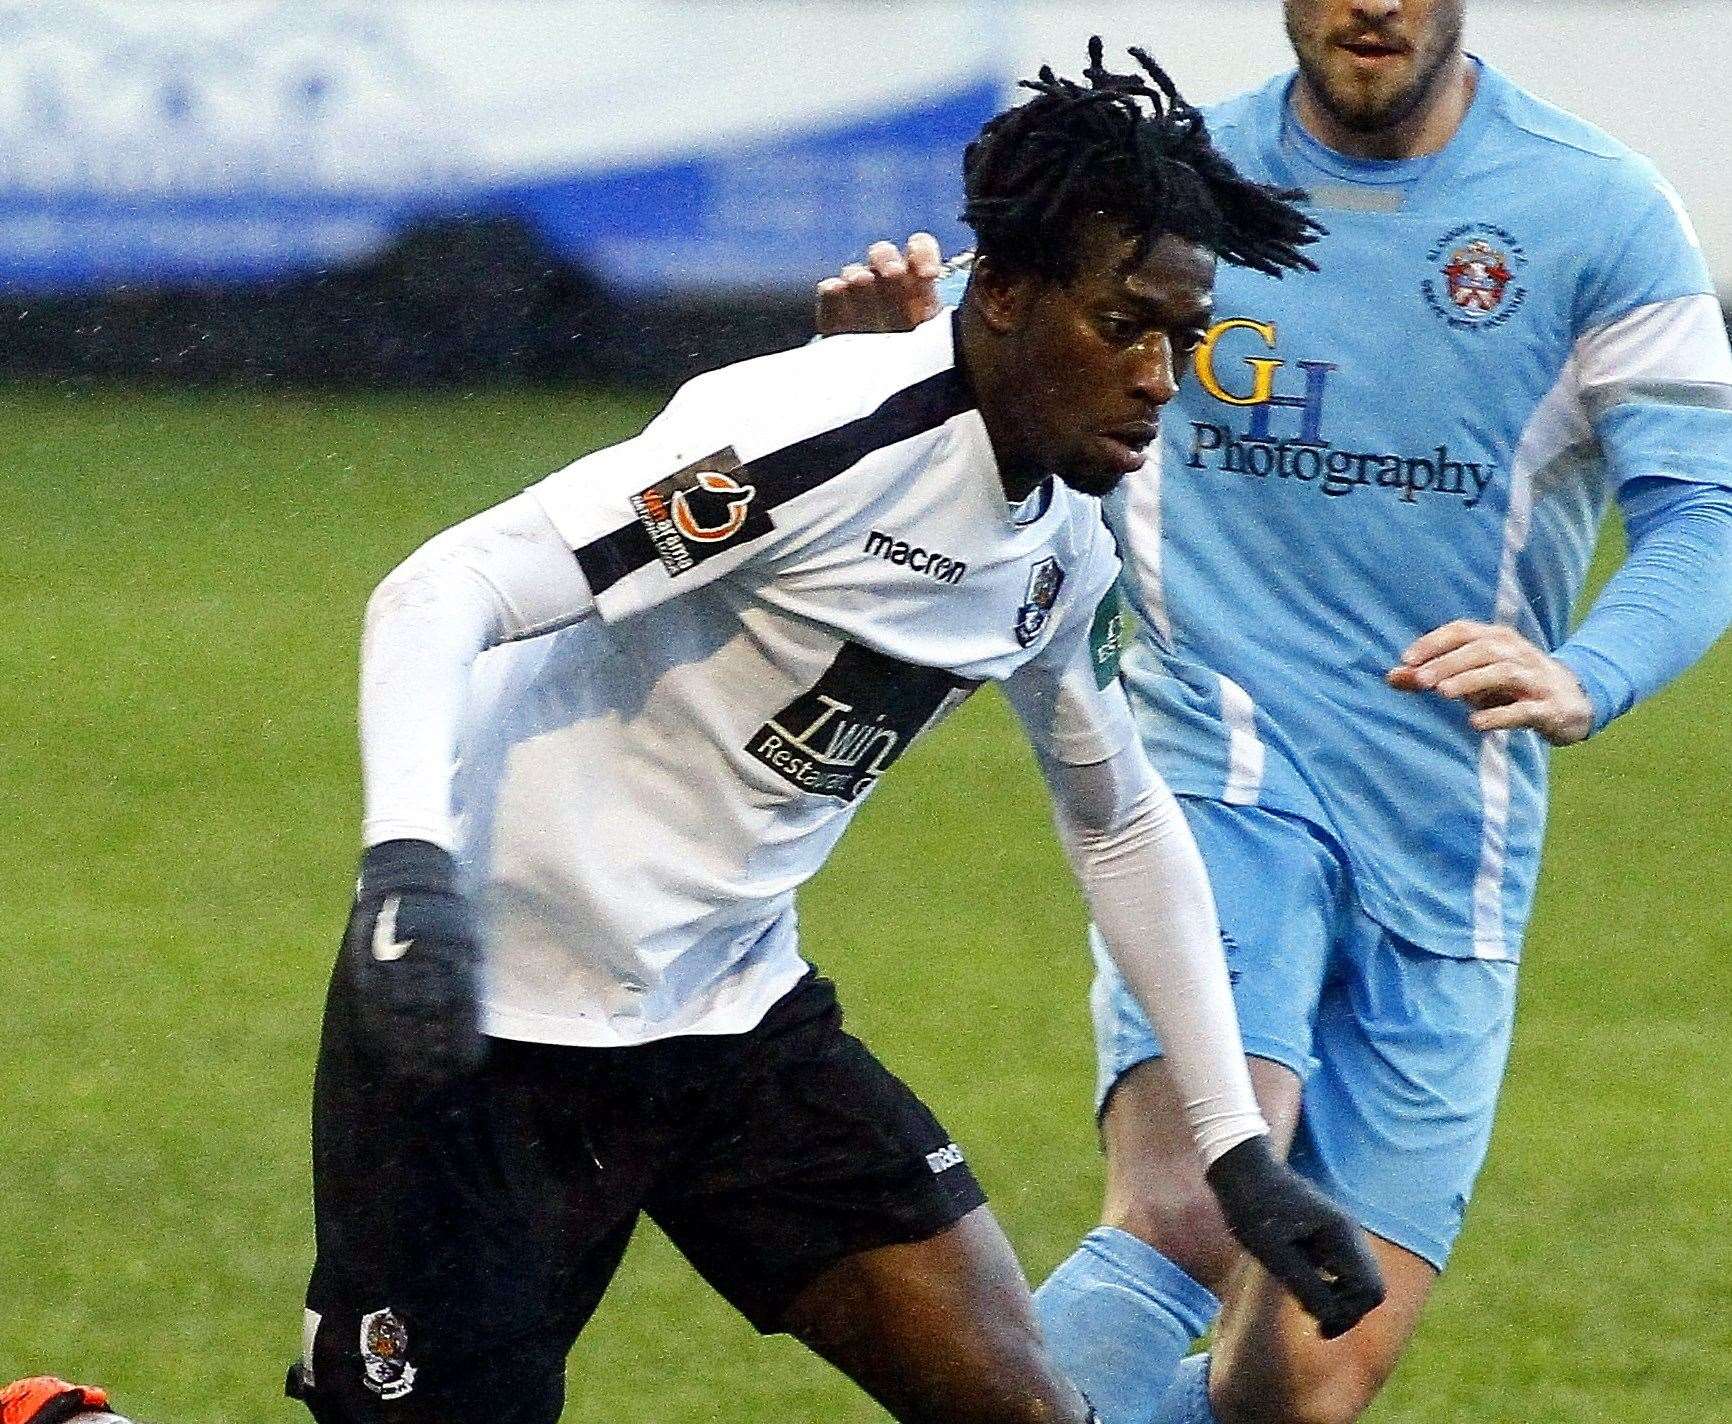 Andre Coker spent most of this season at Dartford Picture: Sean Aidan